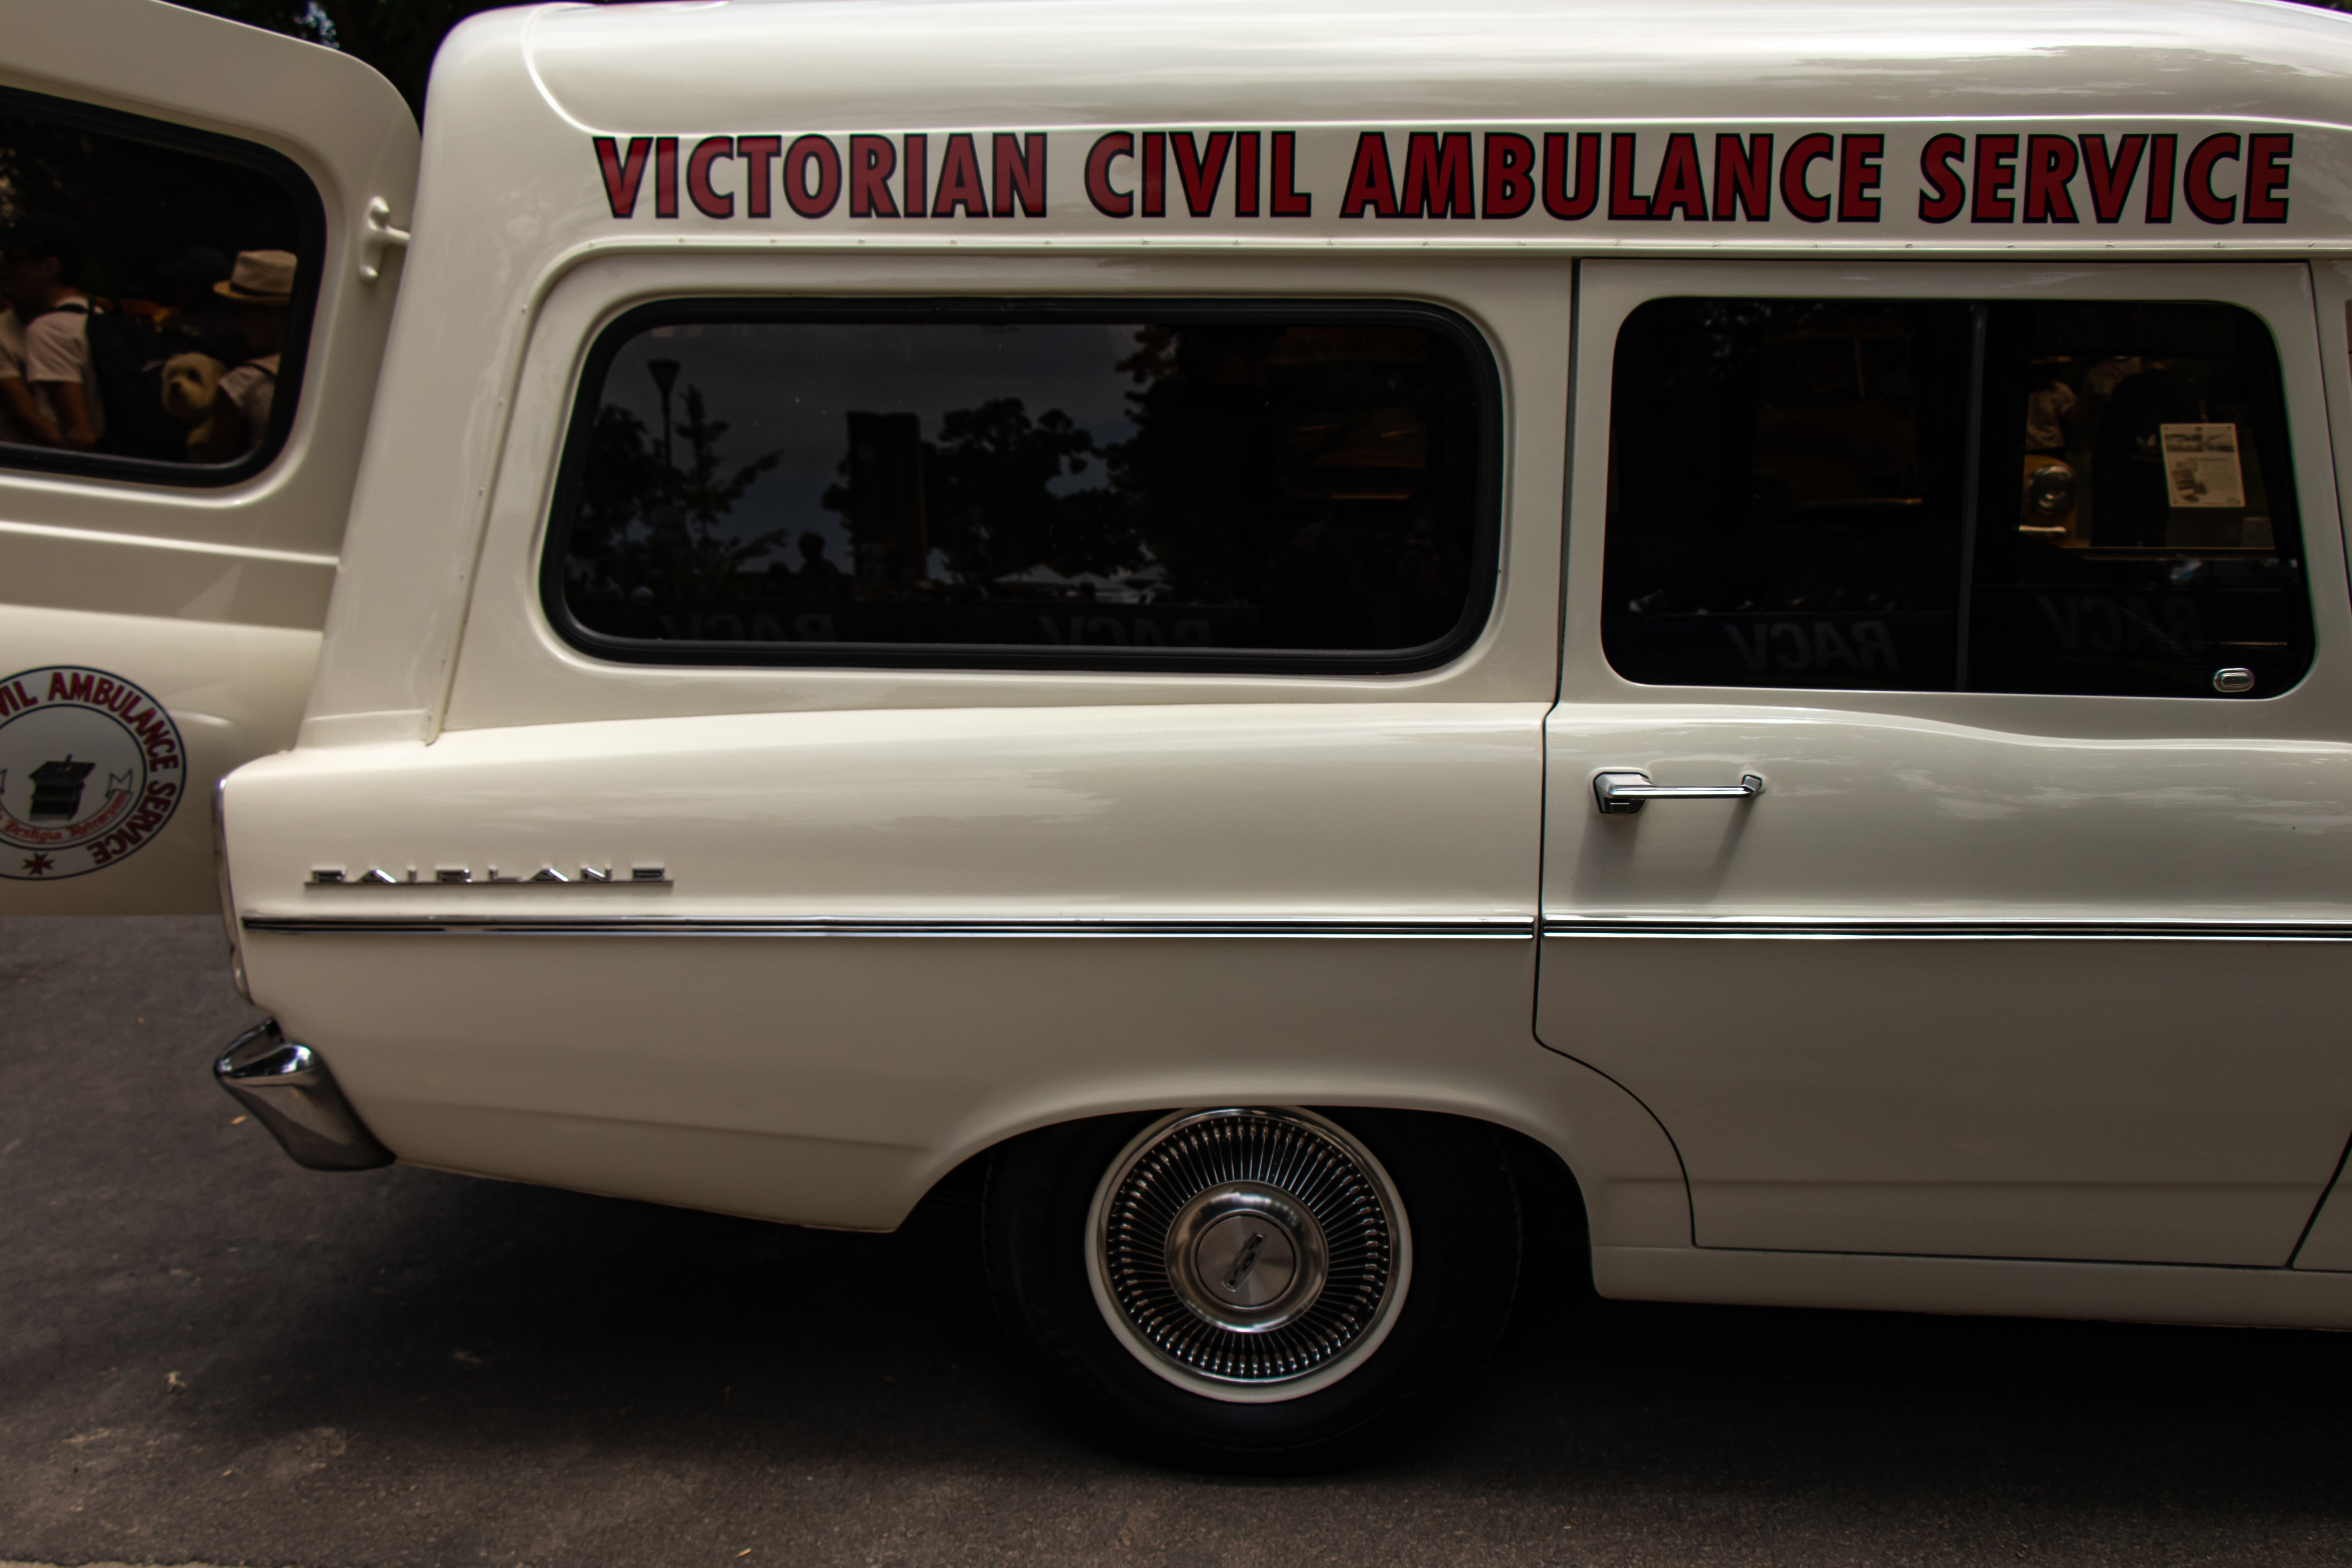 An old image of a Victorian Civil Ambulance Service vehicle.